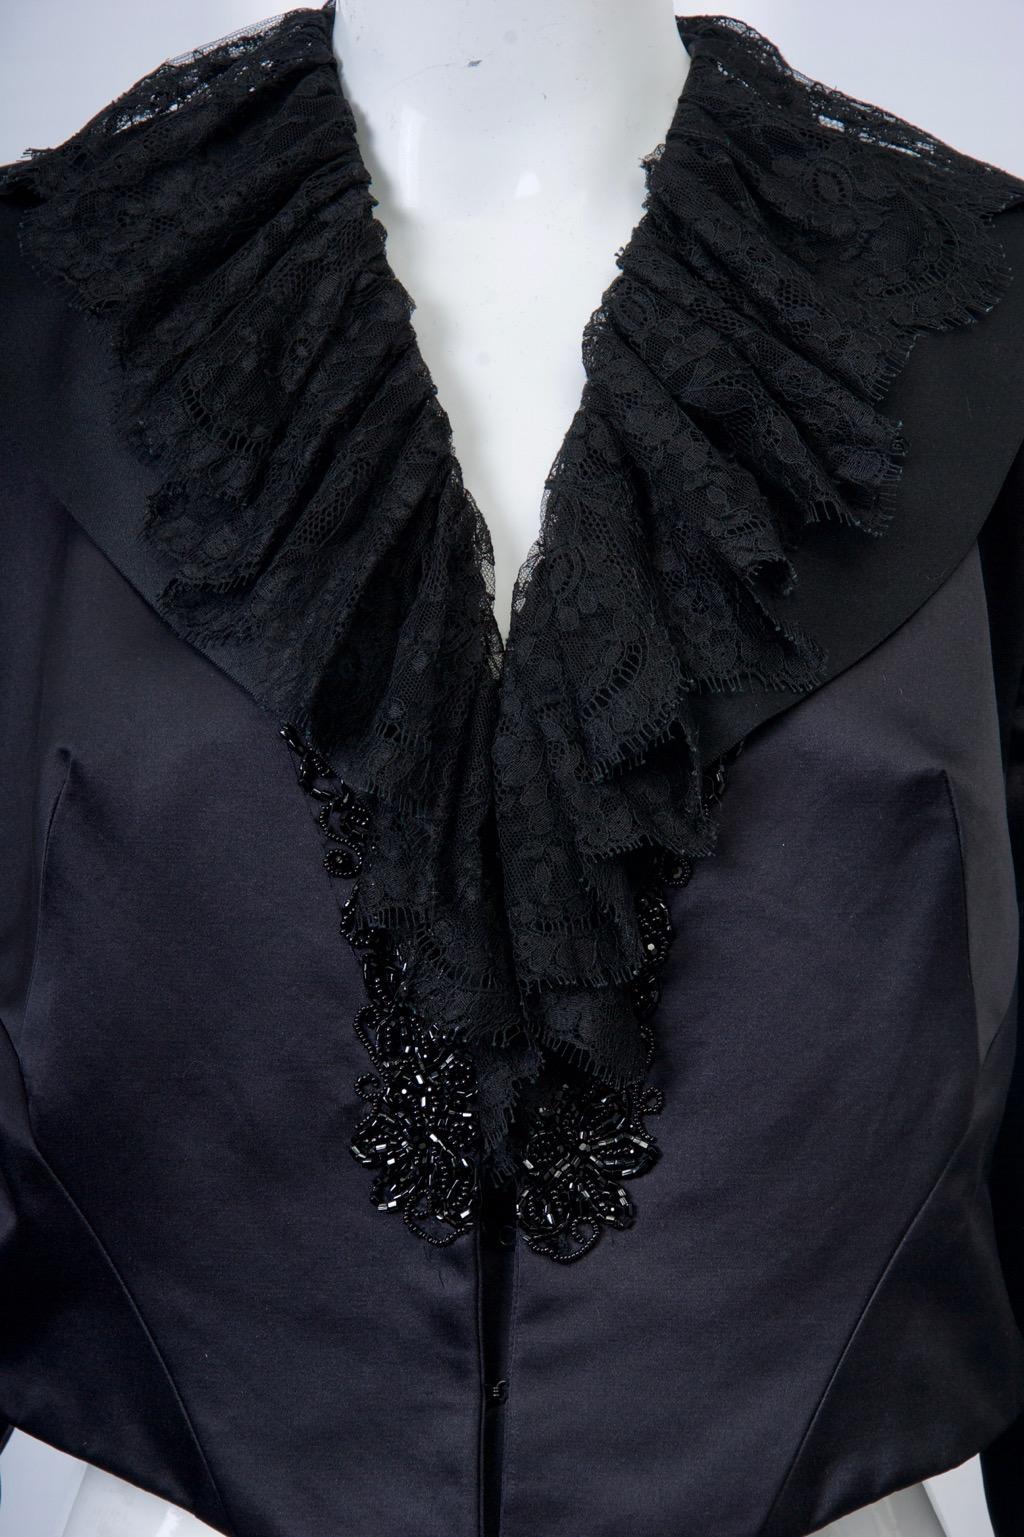 Esteemed contemporary designer Maggie Norris often uses historical references for her couture creations. Here we have a short, Edwardian-influenced evening jacket in black satin featuring black lace ruffle at the v-neck double collar and at the slit